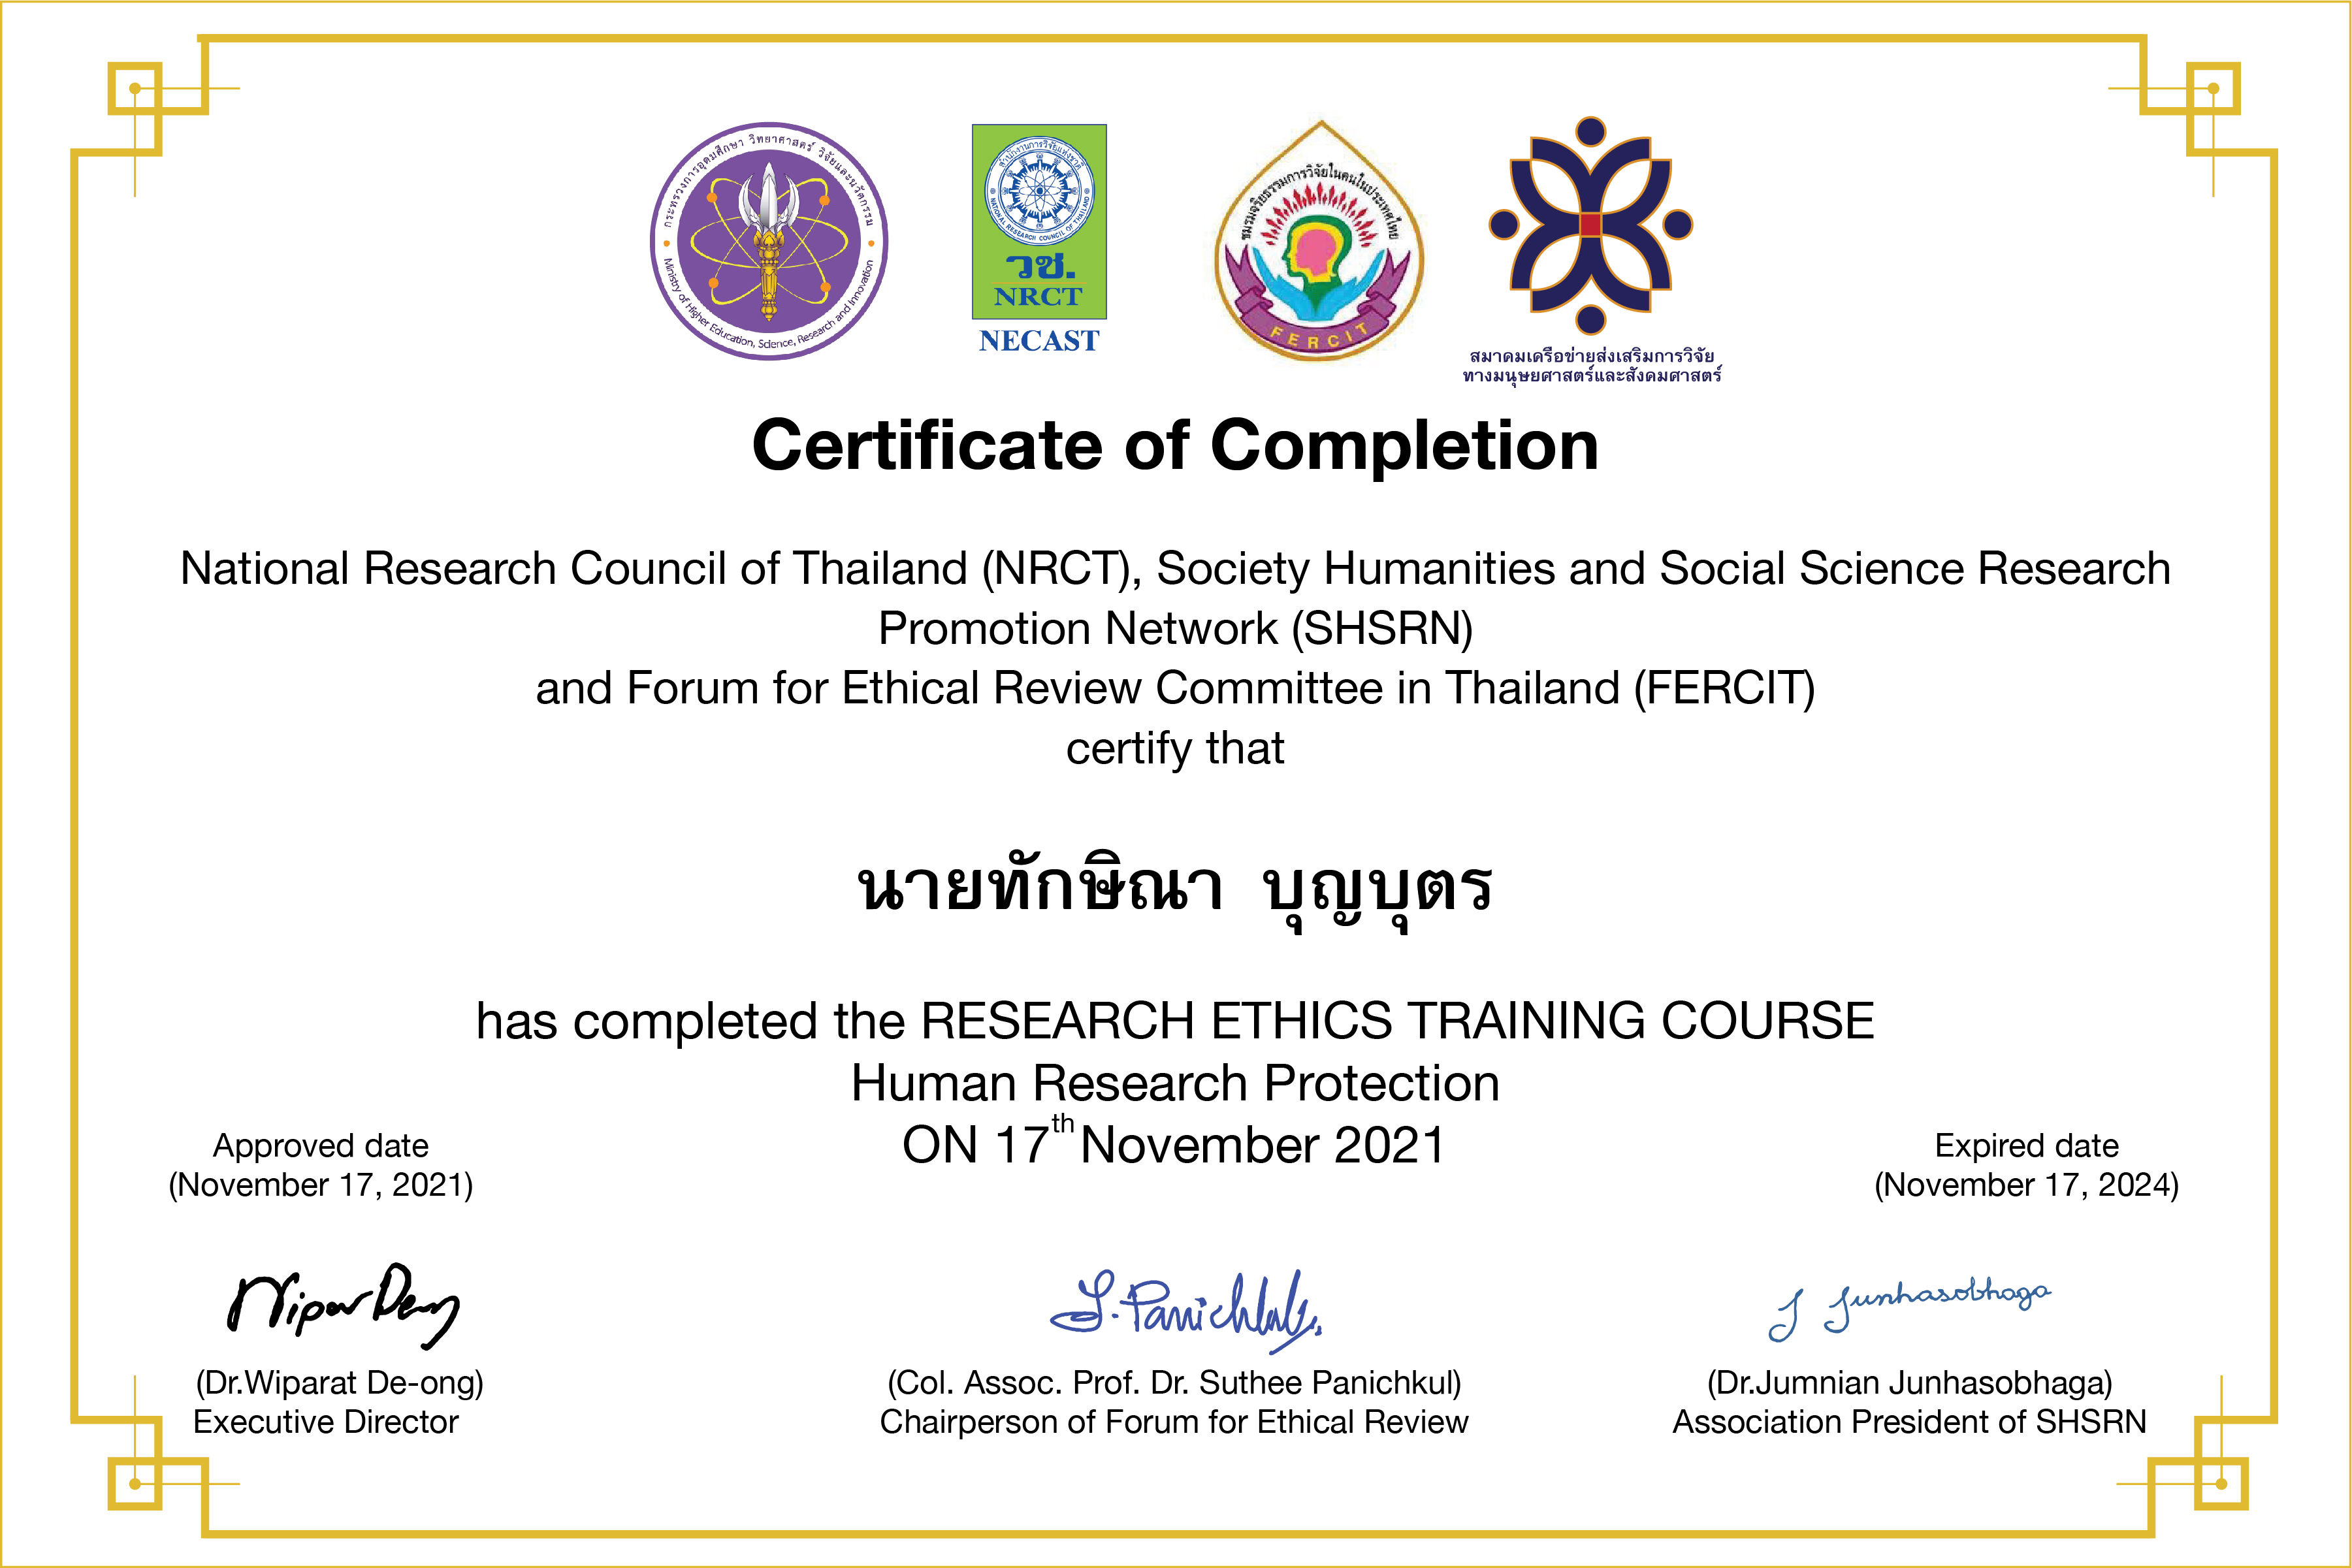 The Research Ethics Training Course